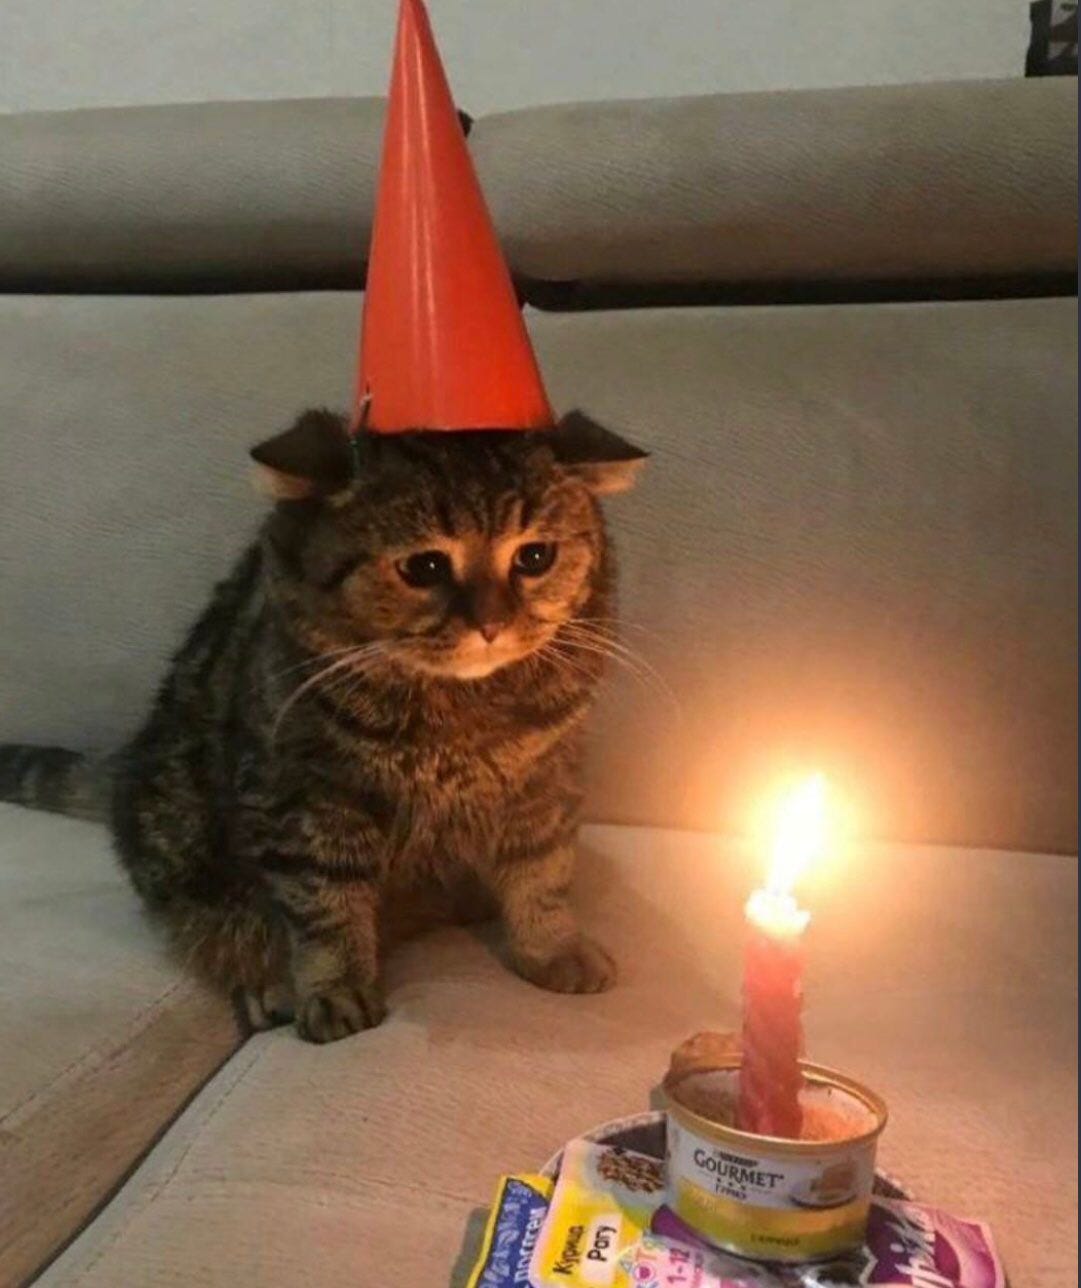 poorly drawn cats on Twitter: "happy birthday to me  https://t.co/NHW1IOXEK0" / Twitter